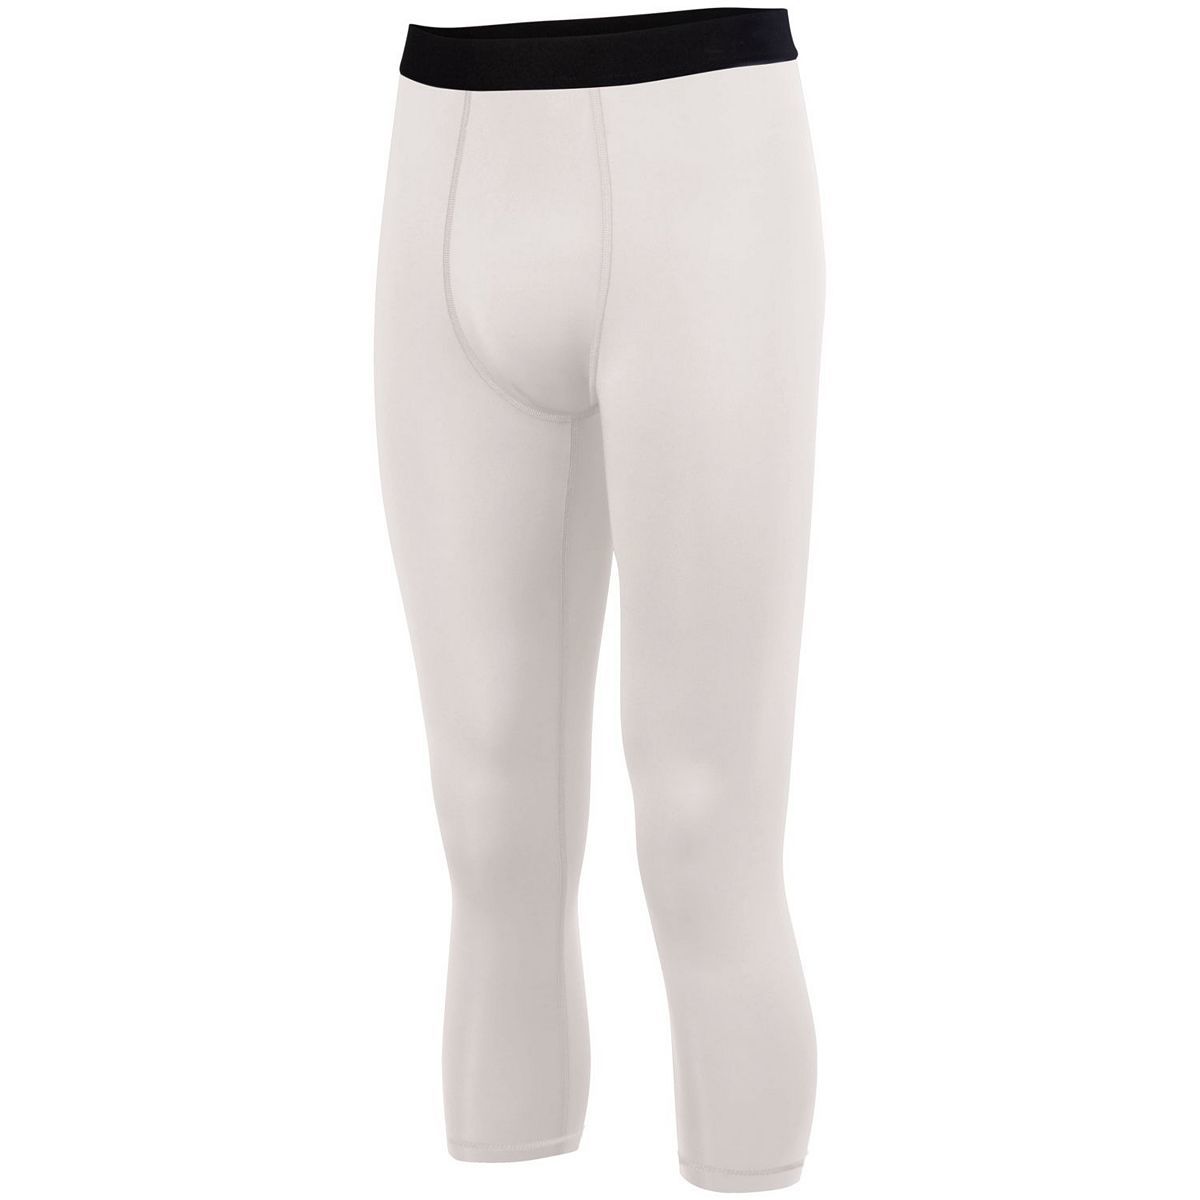 Youth Hyperform Compression Calf-Length Tight - 2619